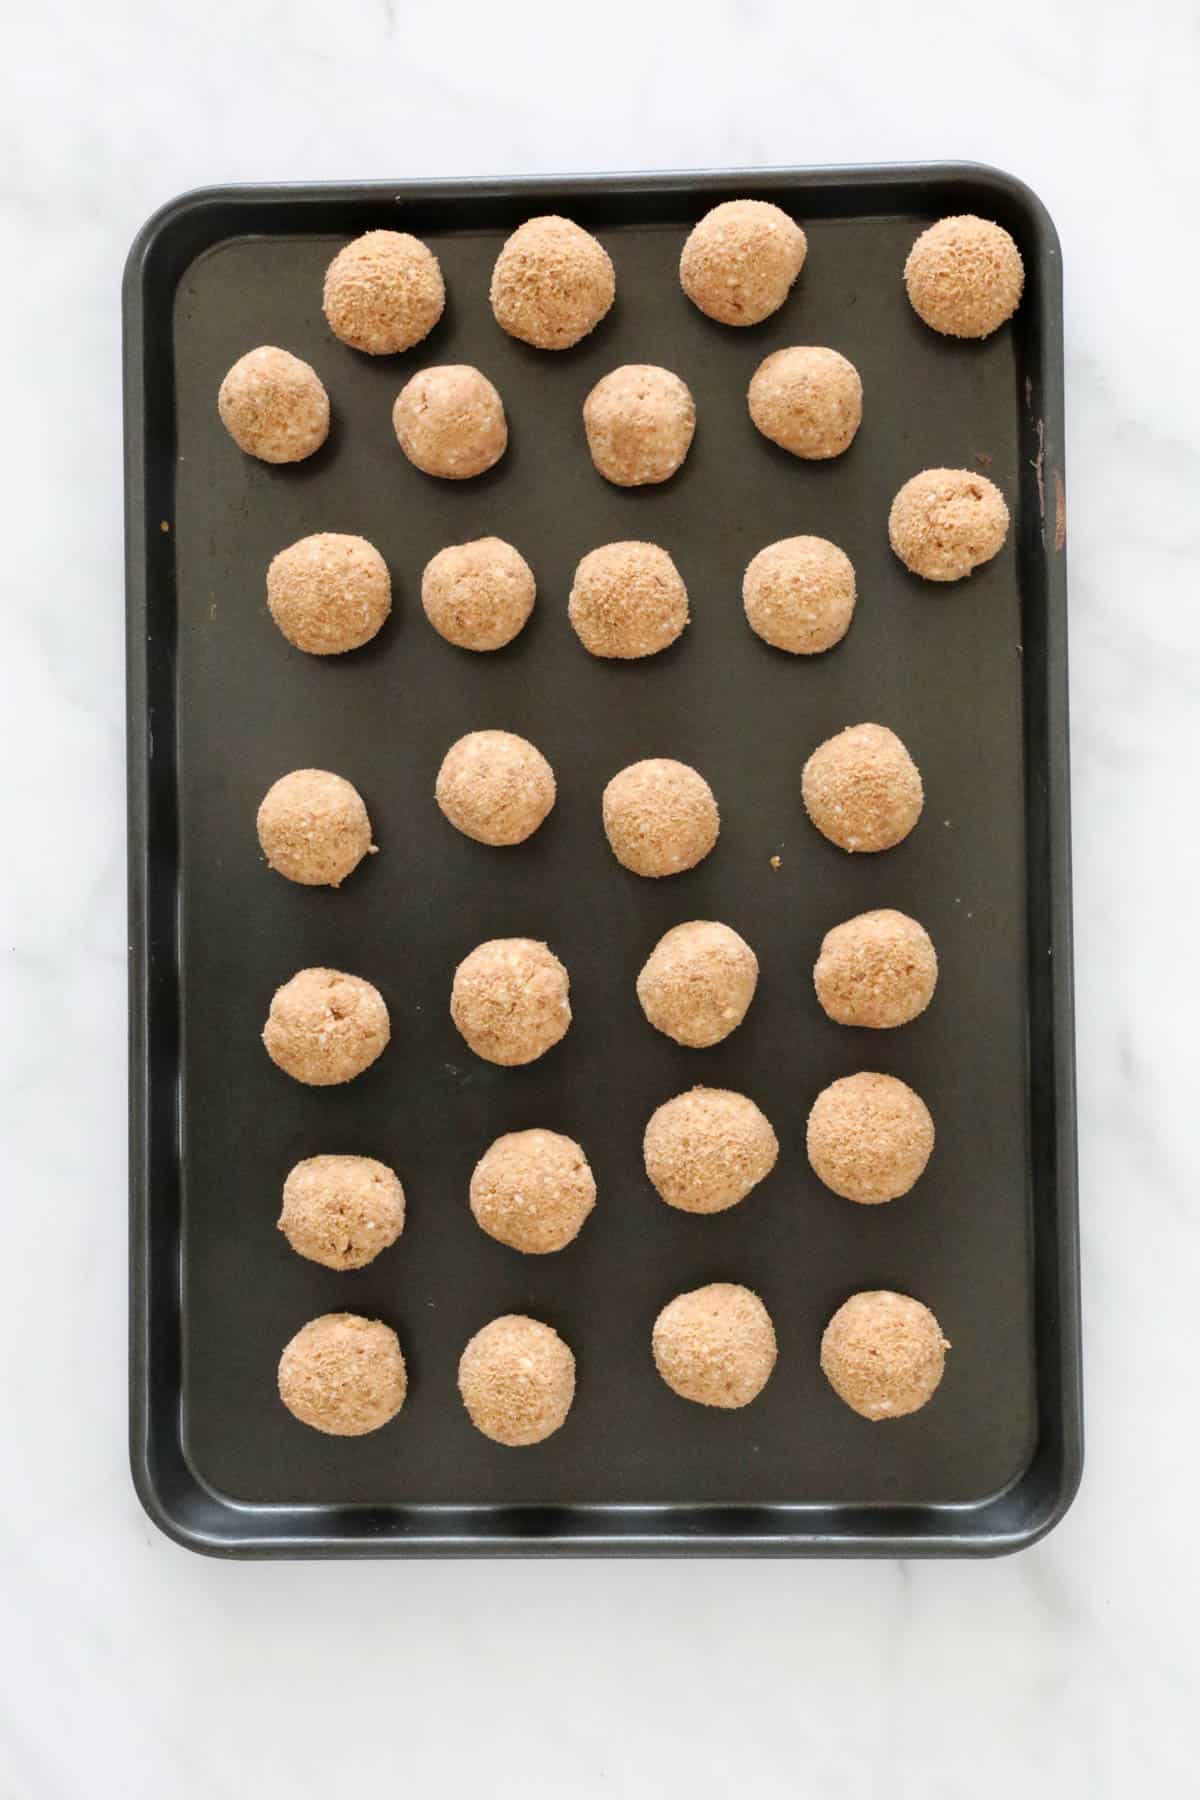 Cream cheese and biscuit mixture rolled into balls and placed on a baking tray